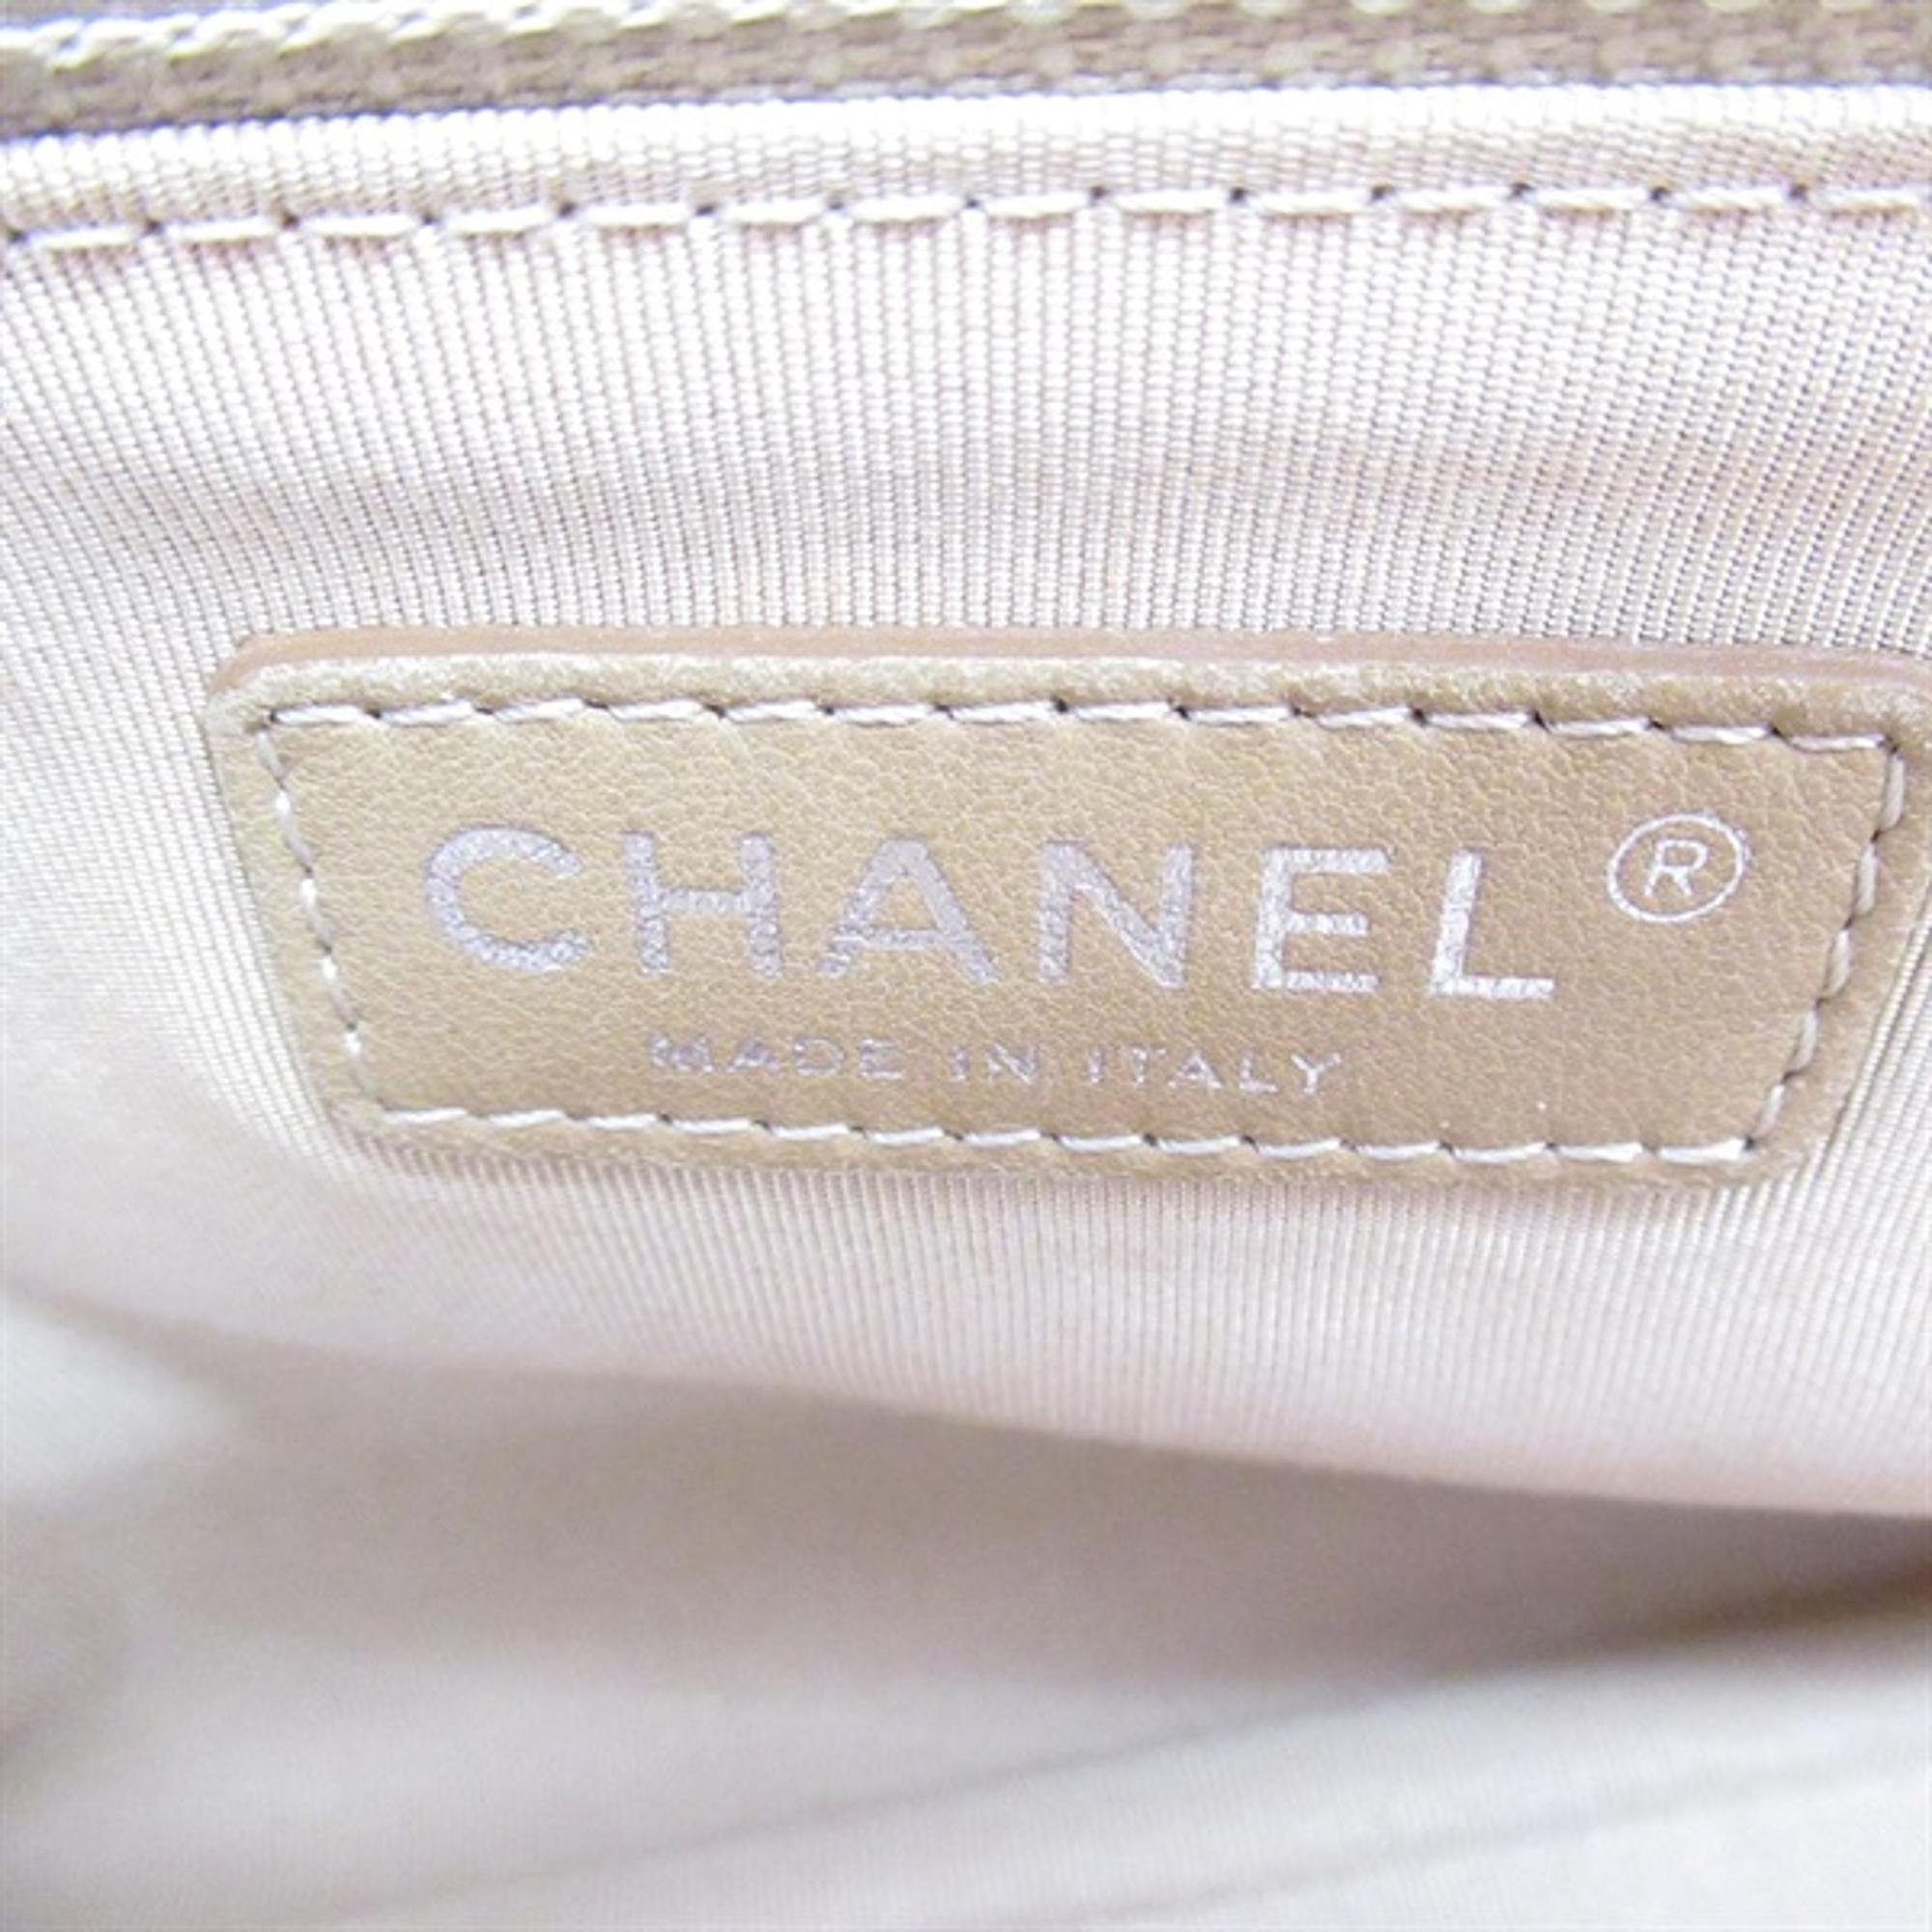 Chanel Brown Quilted Caviar Chain Tote Bag